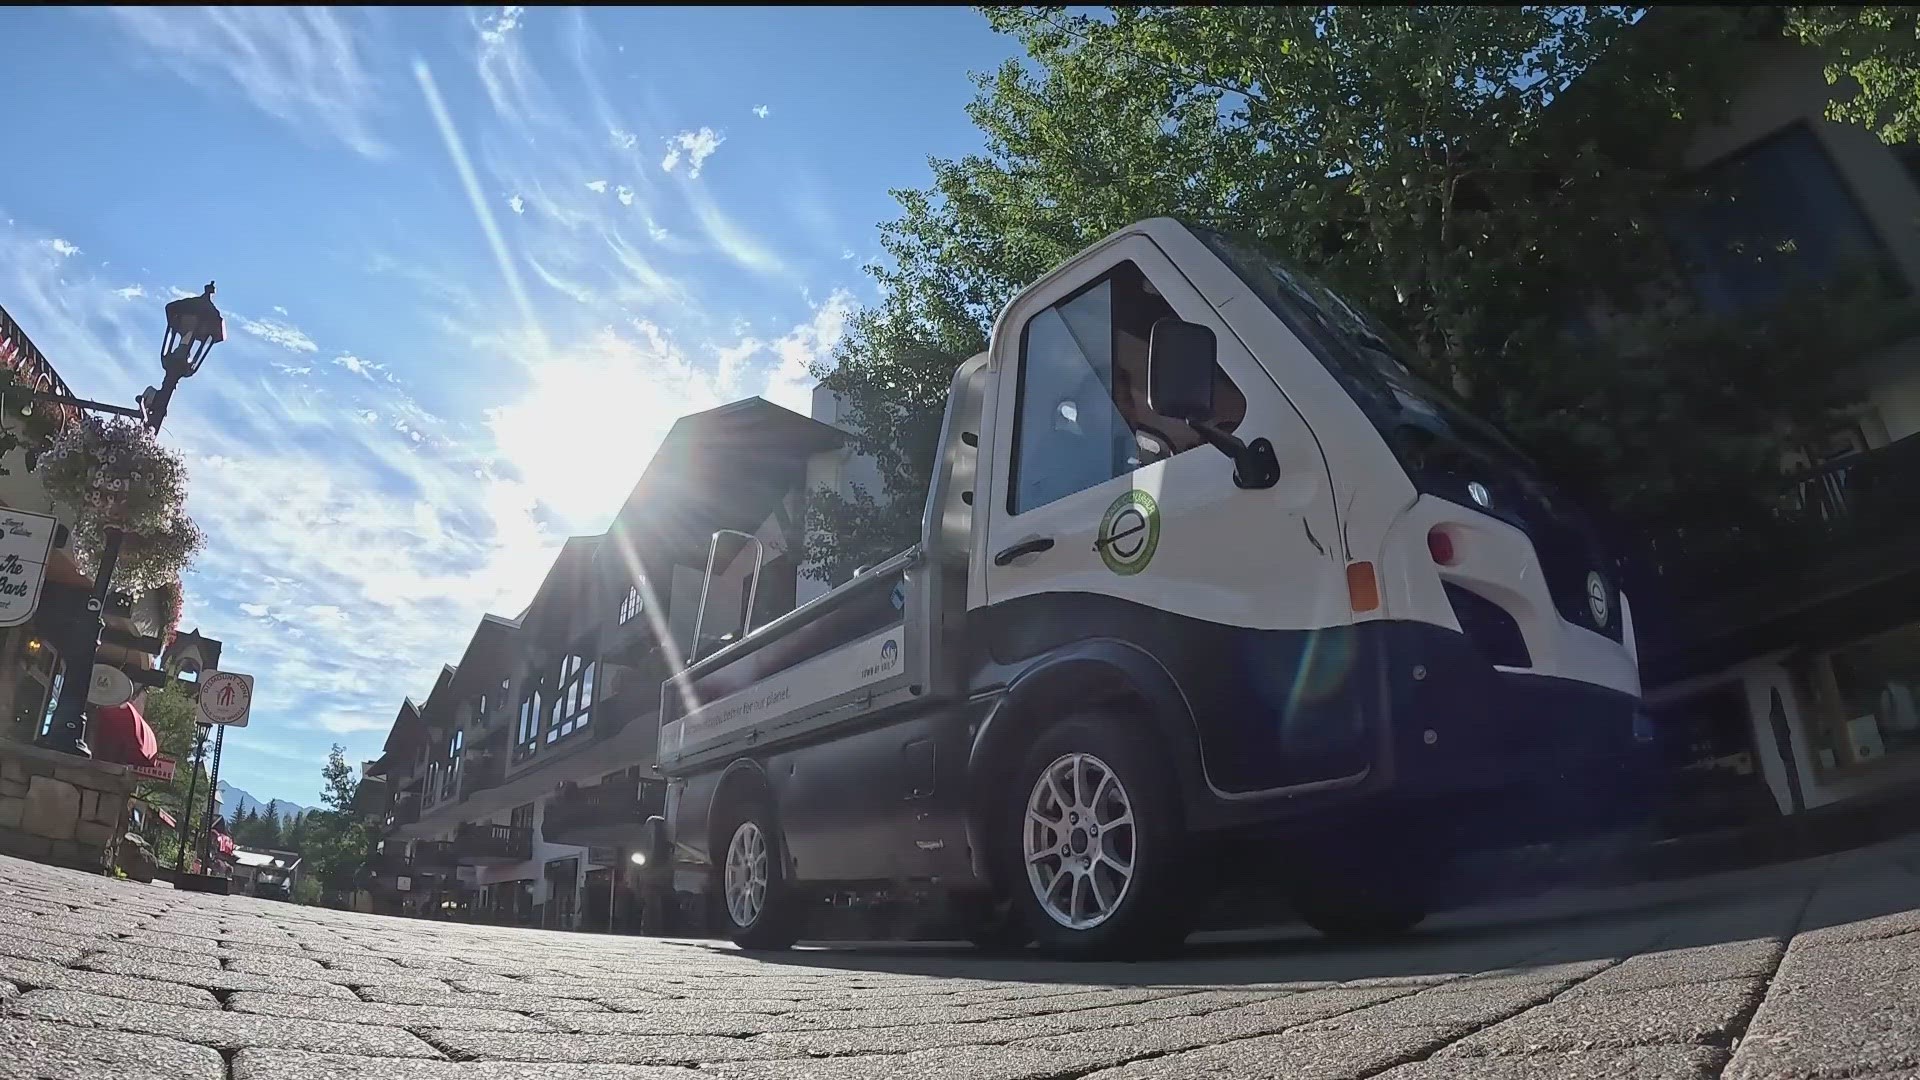 The town of Vail is looking to expand a program that has taken large delivery trucks out of the core of town and replaced them with small electric vehicles for deliv